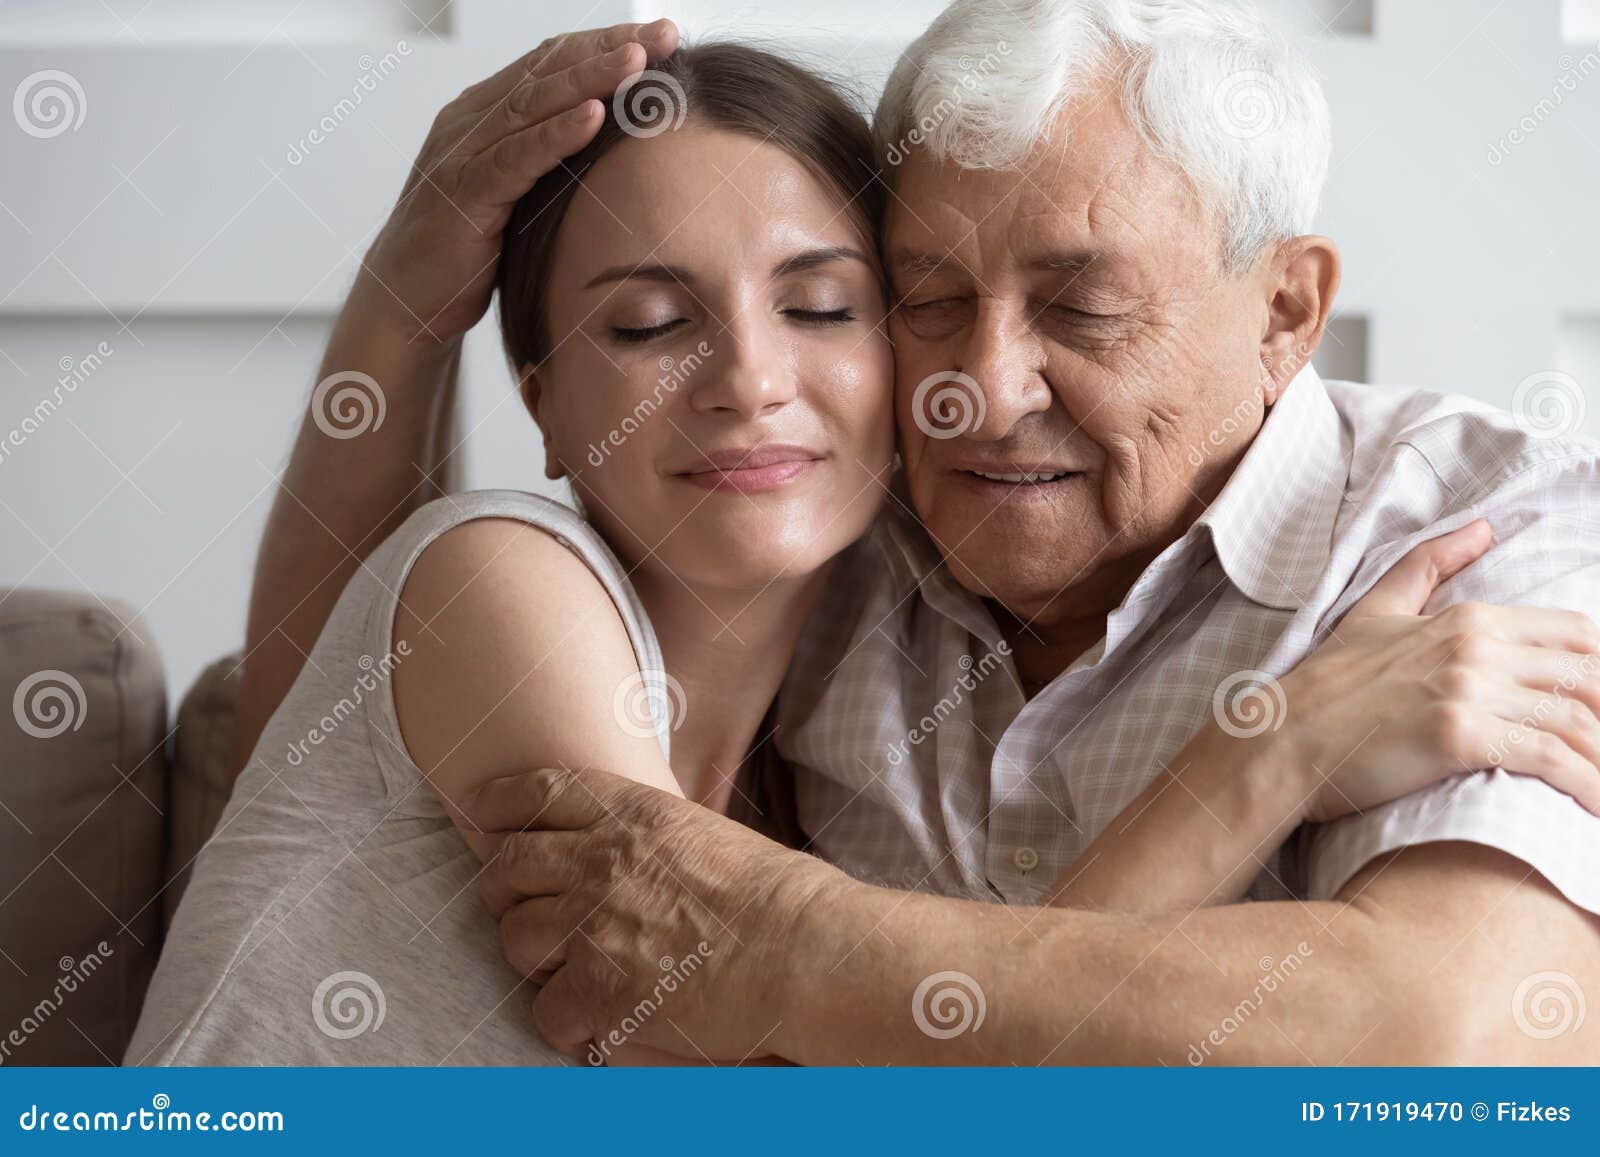 loving mature dad and daughter cuddle at home together